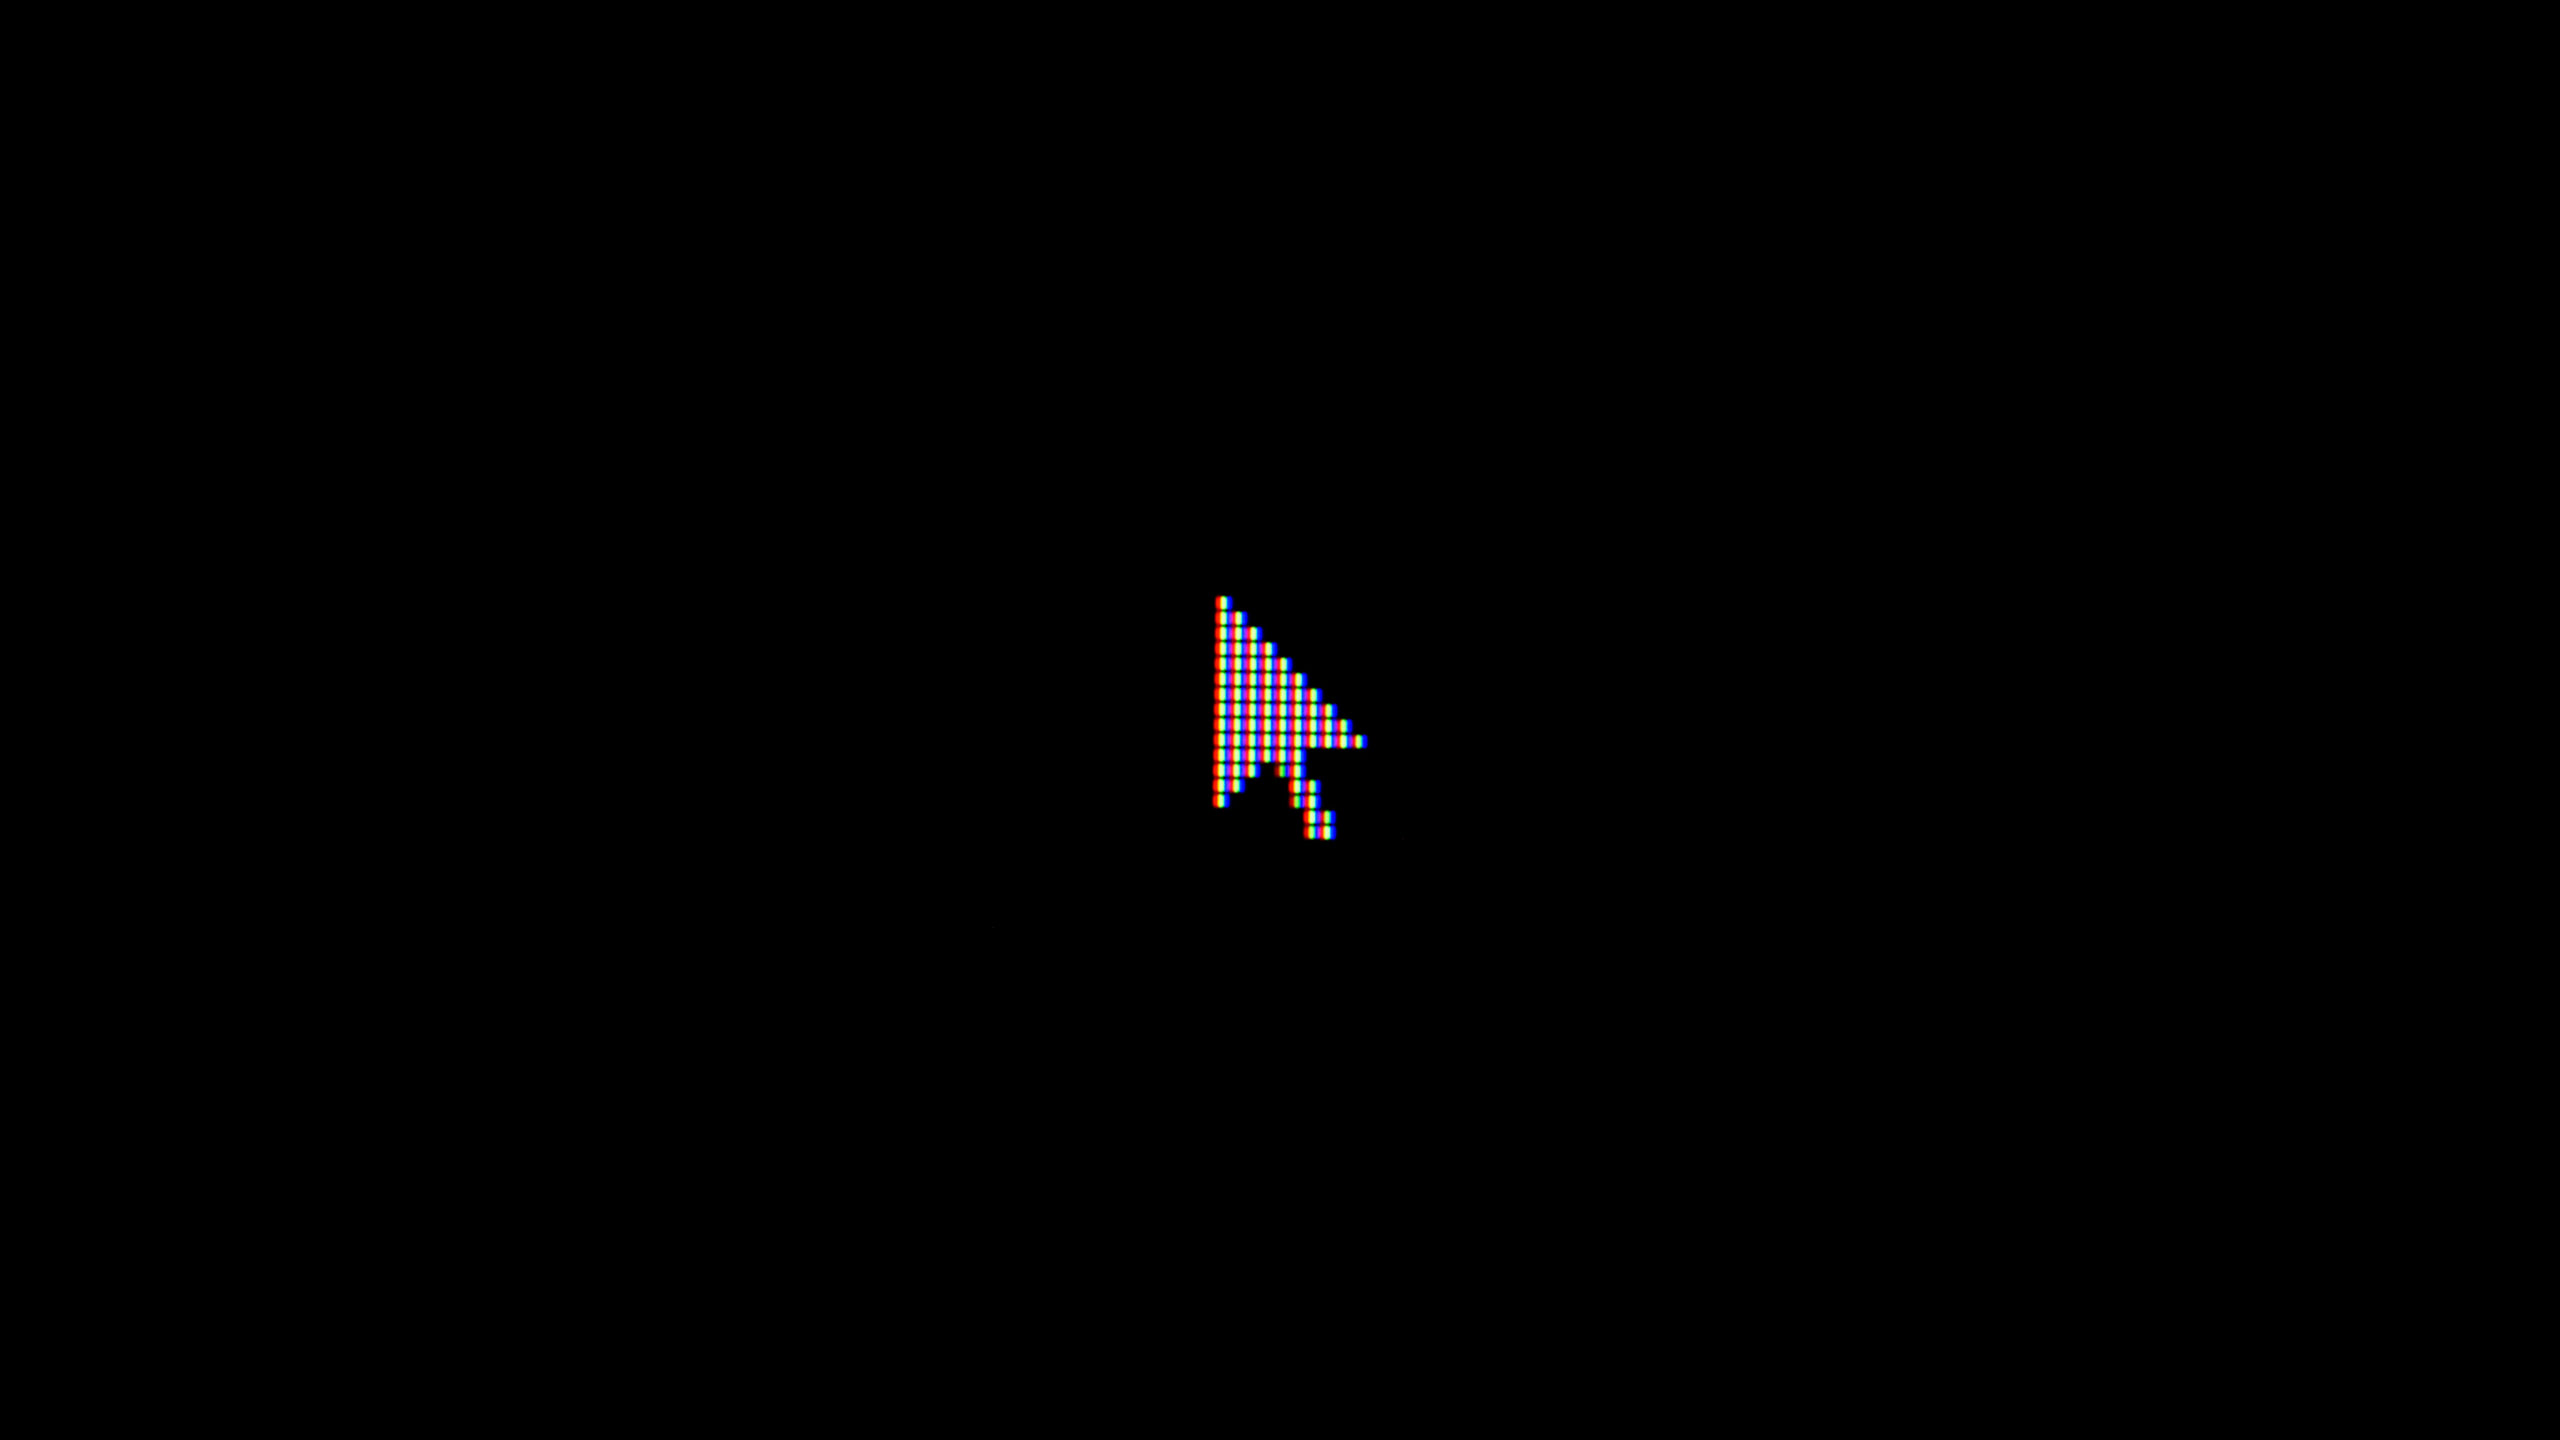 Zoomed image of a computer cursor showing individual pixels